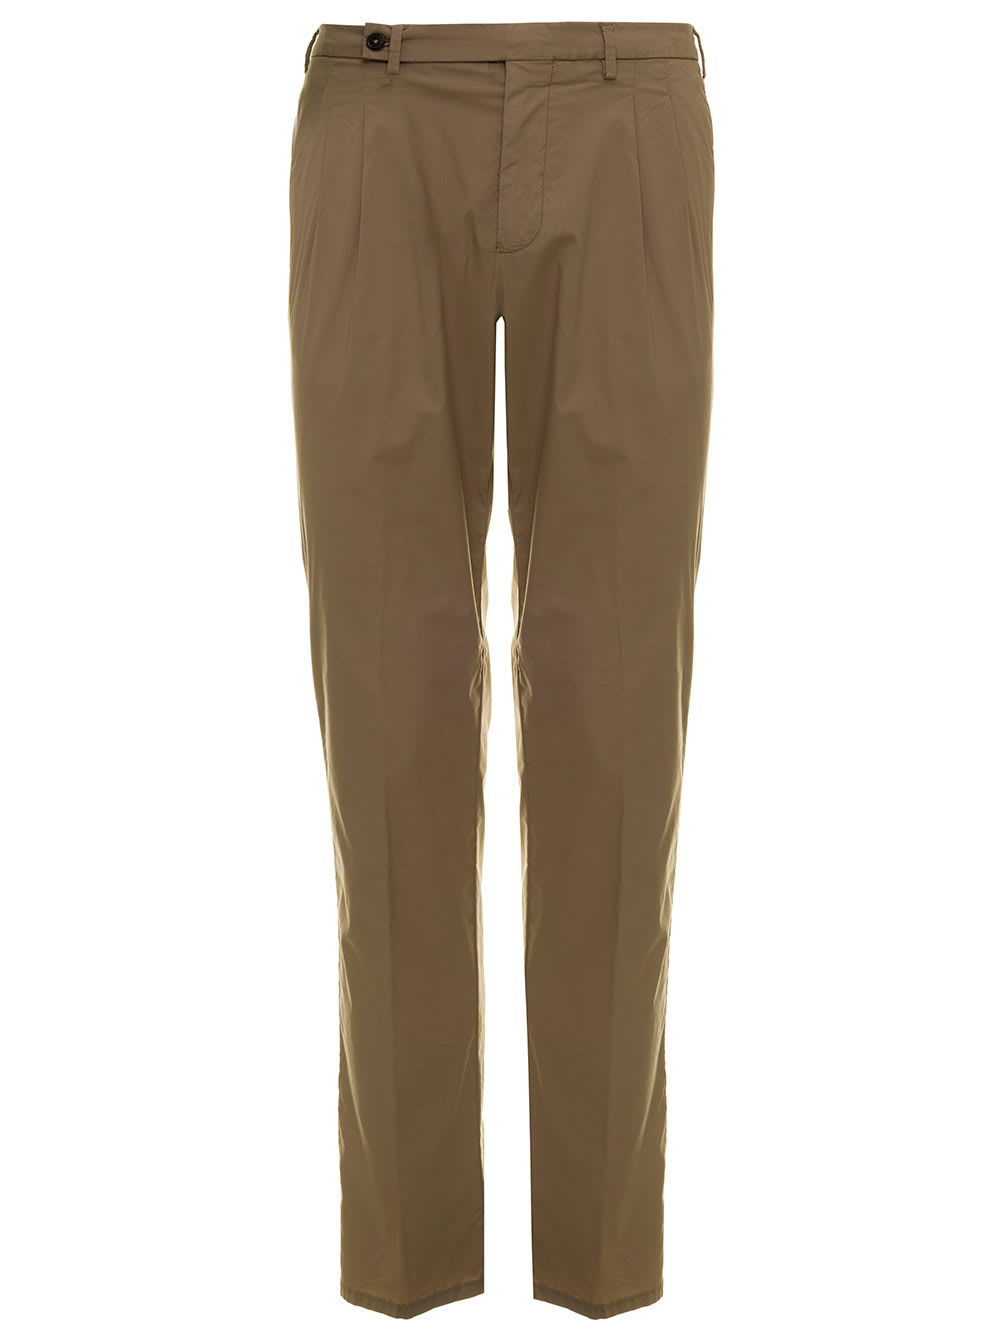 Berwich Mans Beige Cotton And Lyocell Pants